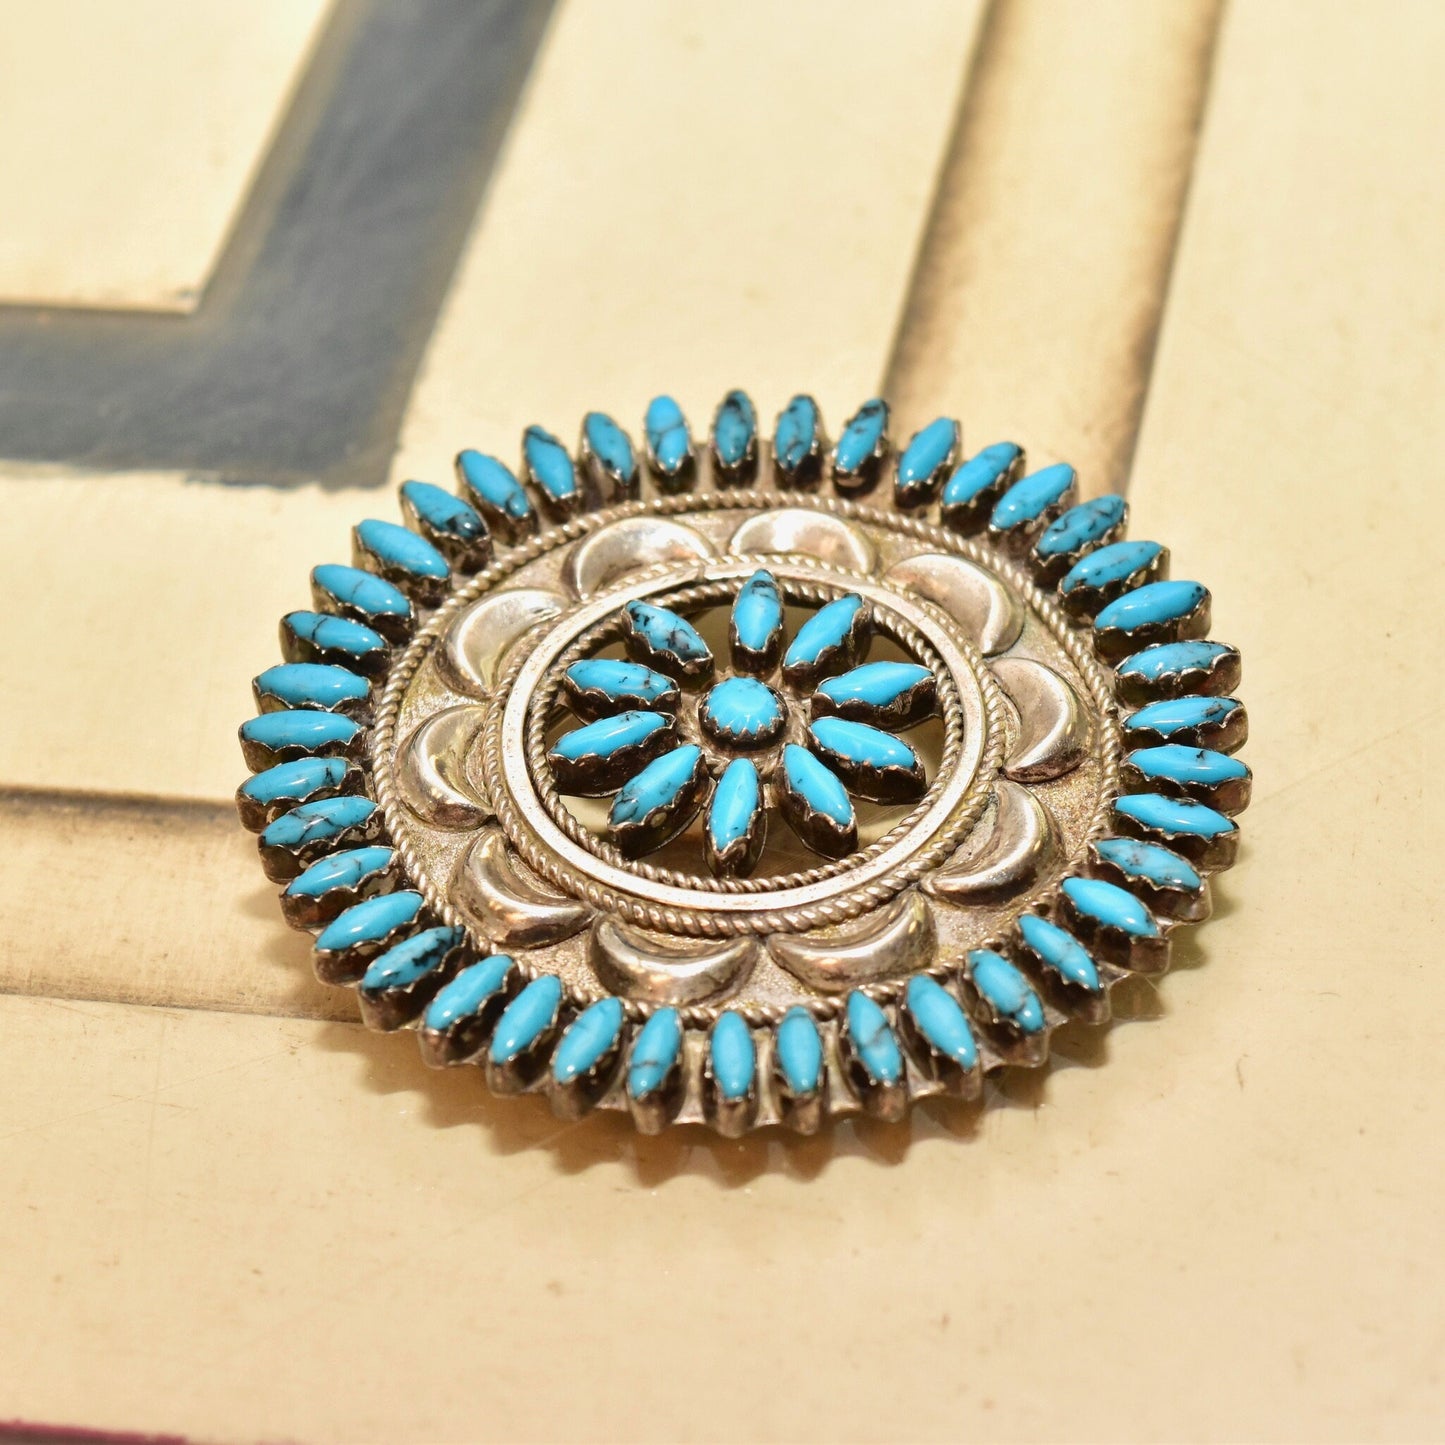 Zuni Needlepoint Turquoise Brooch Pin, Native American Handmade Sterling Silver Turquoise Medallion Brooch, 2 1/2"